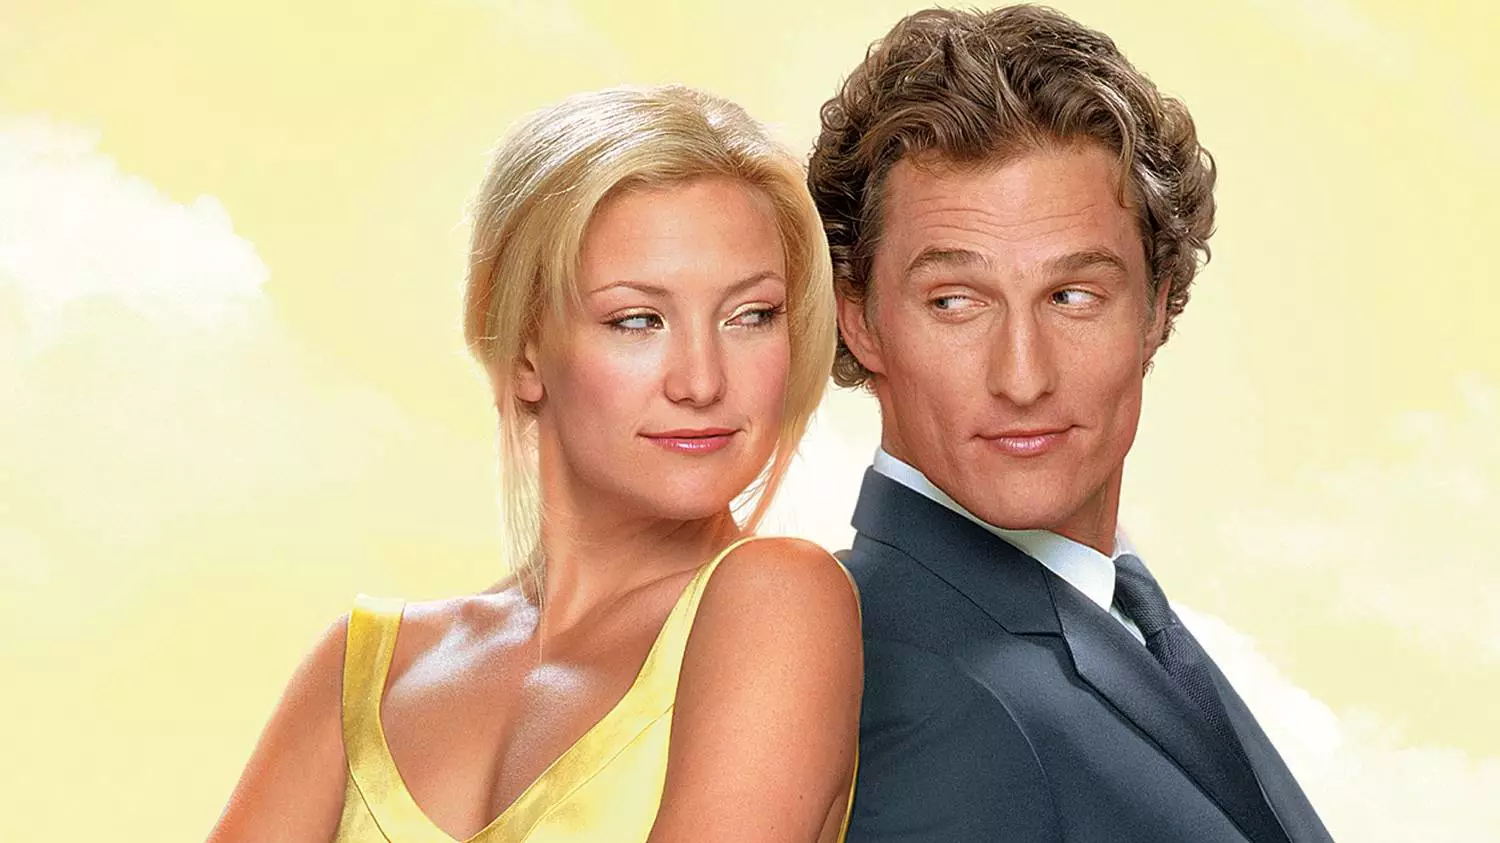 ​It Looks Like We Could Be Getting A 'How To Lose A Guy In 10 Days' Sequel